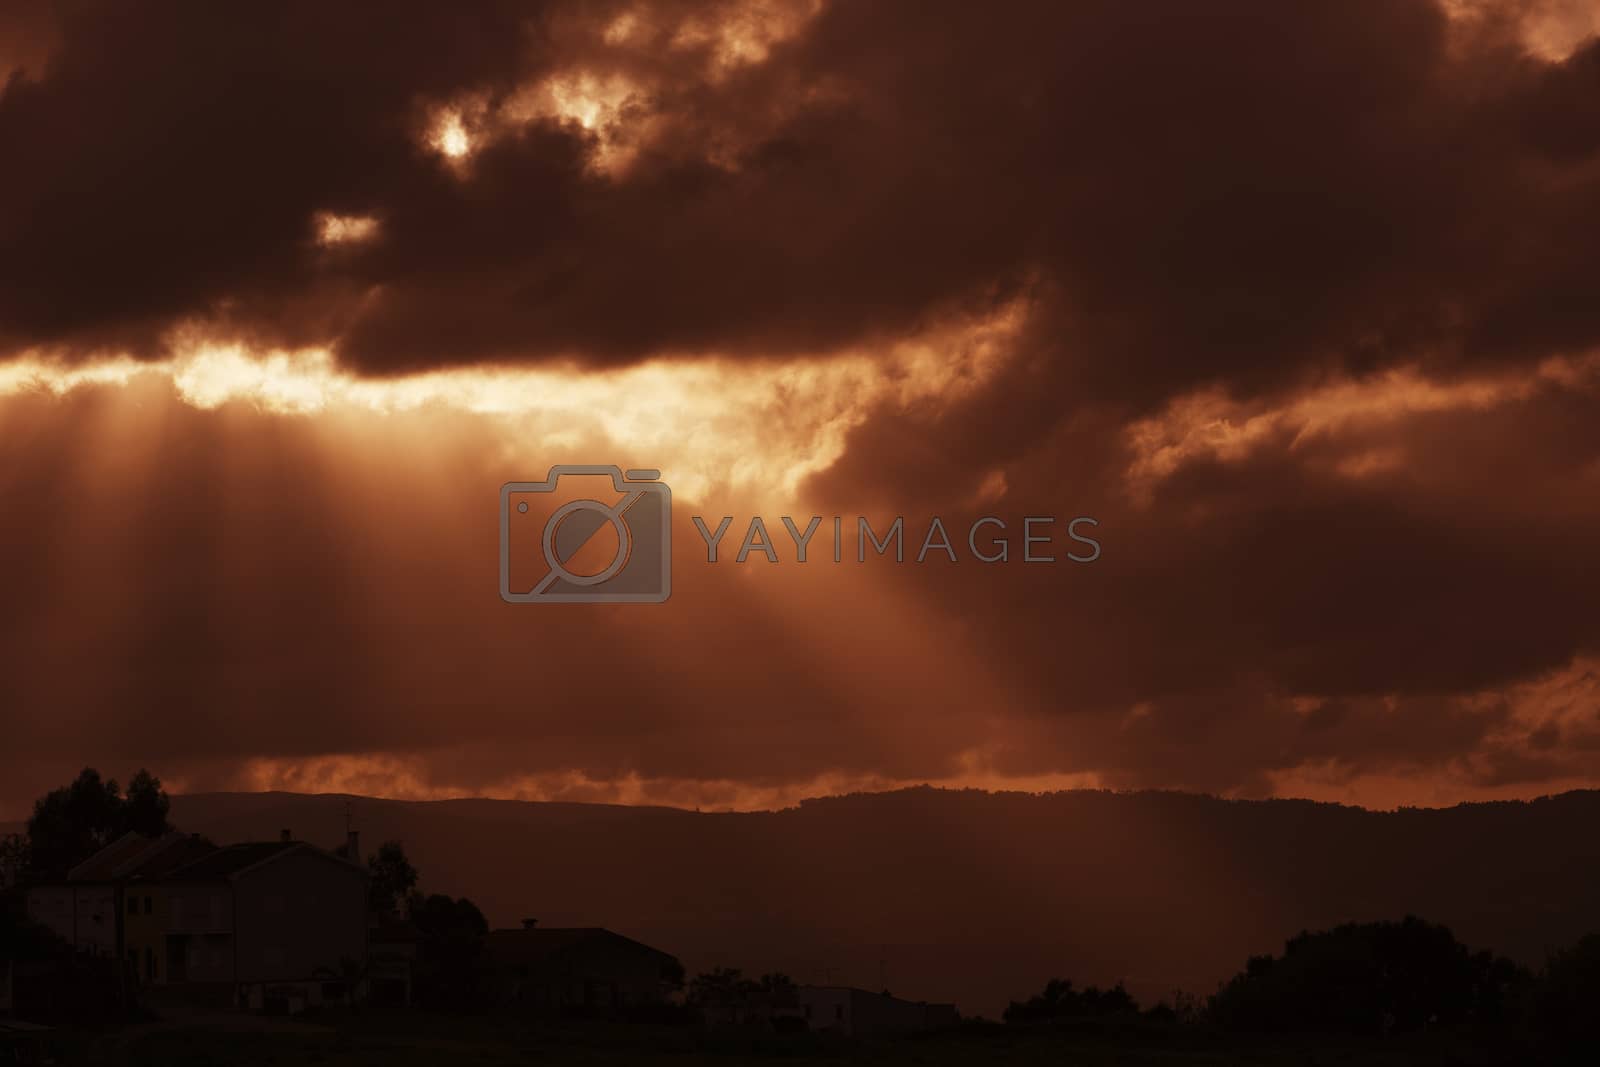 Royalty free image of sunset by zittto